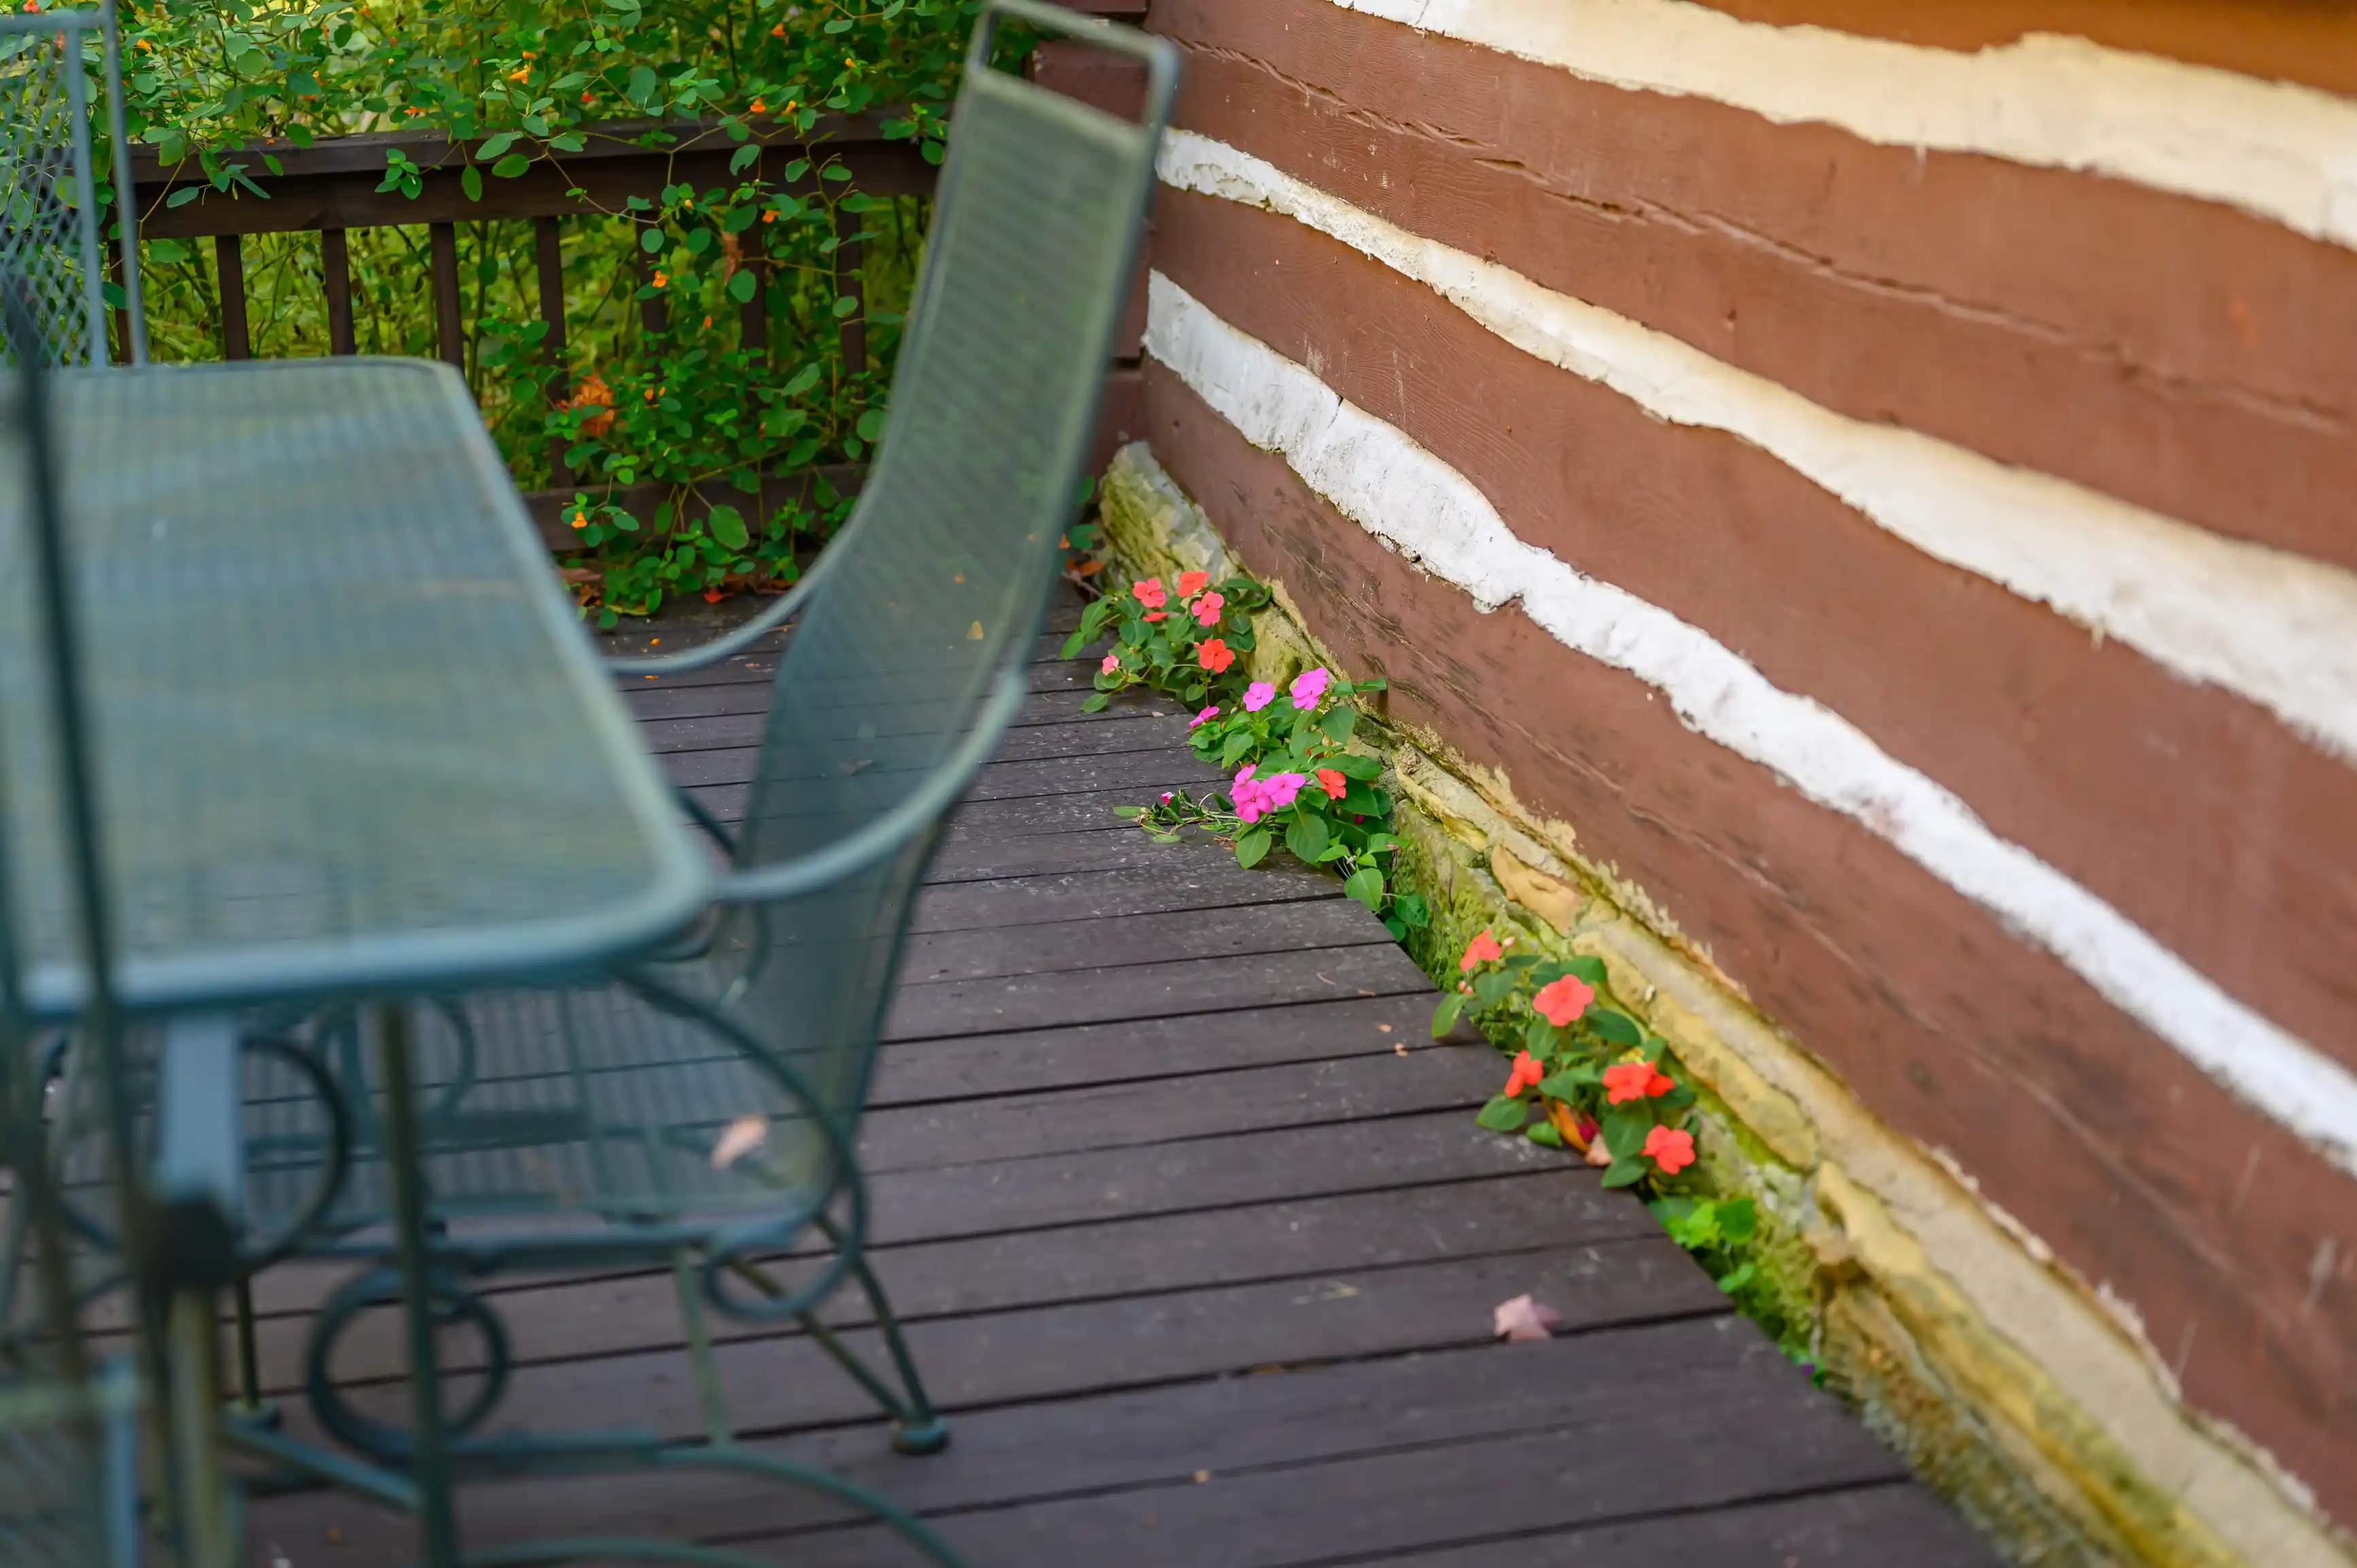 Outdoor patio area with a metal chair and table set on a wooden deck, adjacent to a house with brick siding, and some pink flowers sprouting between the planks.